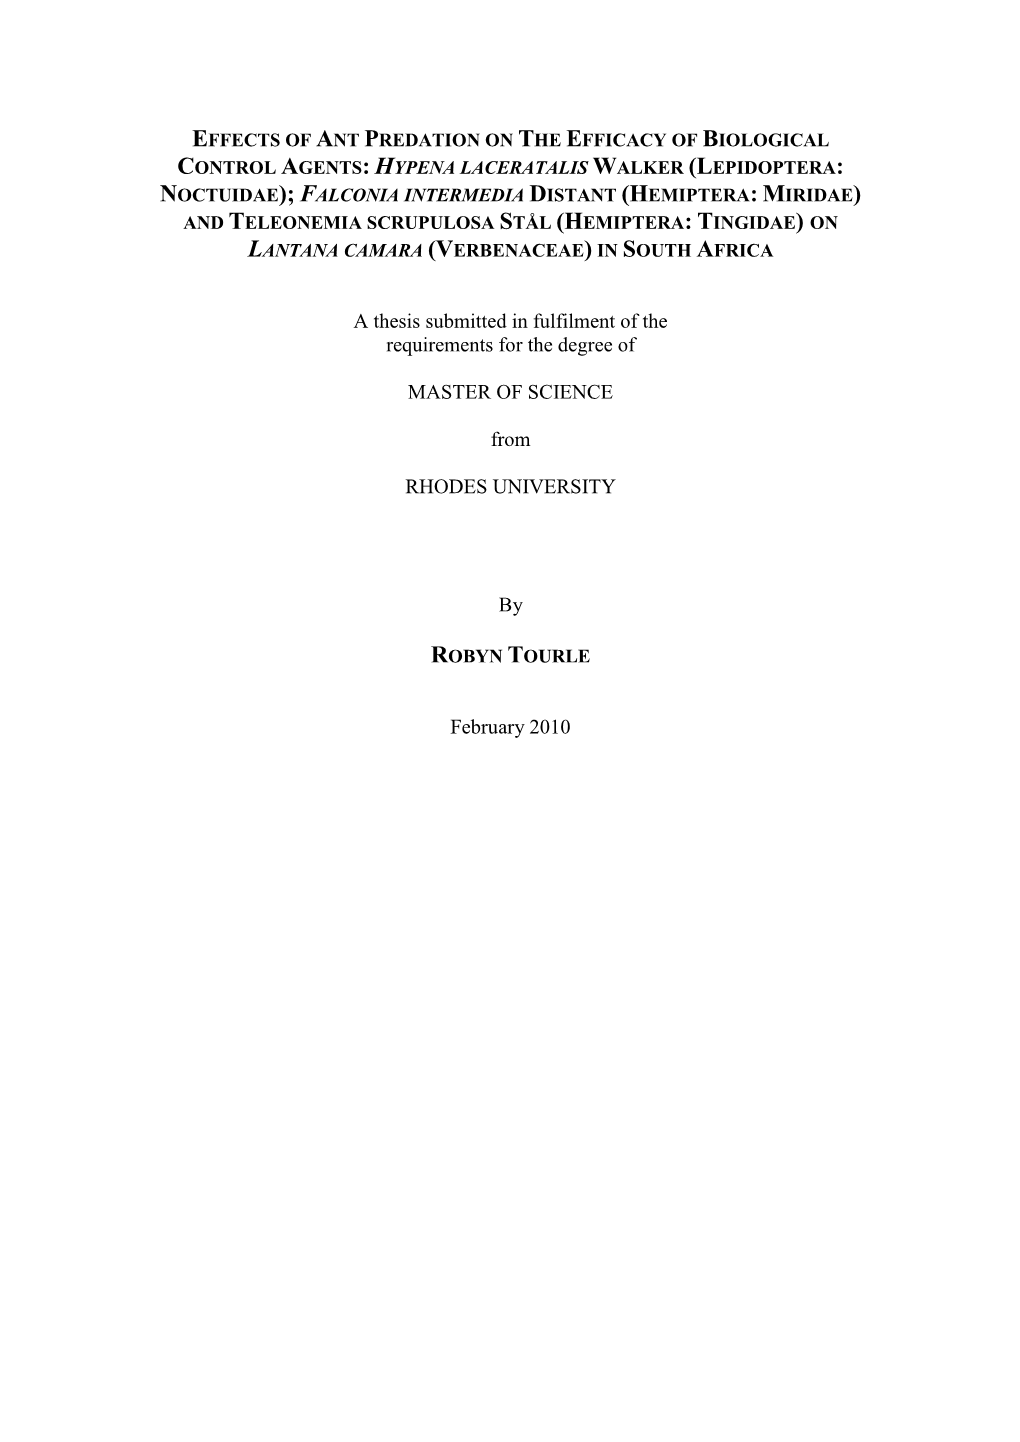 A Thesis Submitted in Fulfilment of the Requirements for the Degree Of